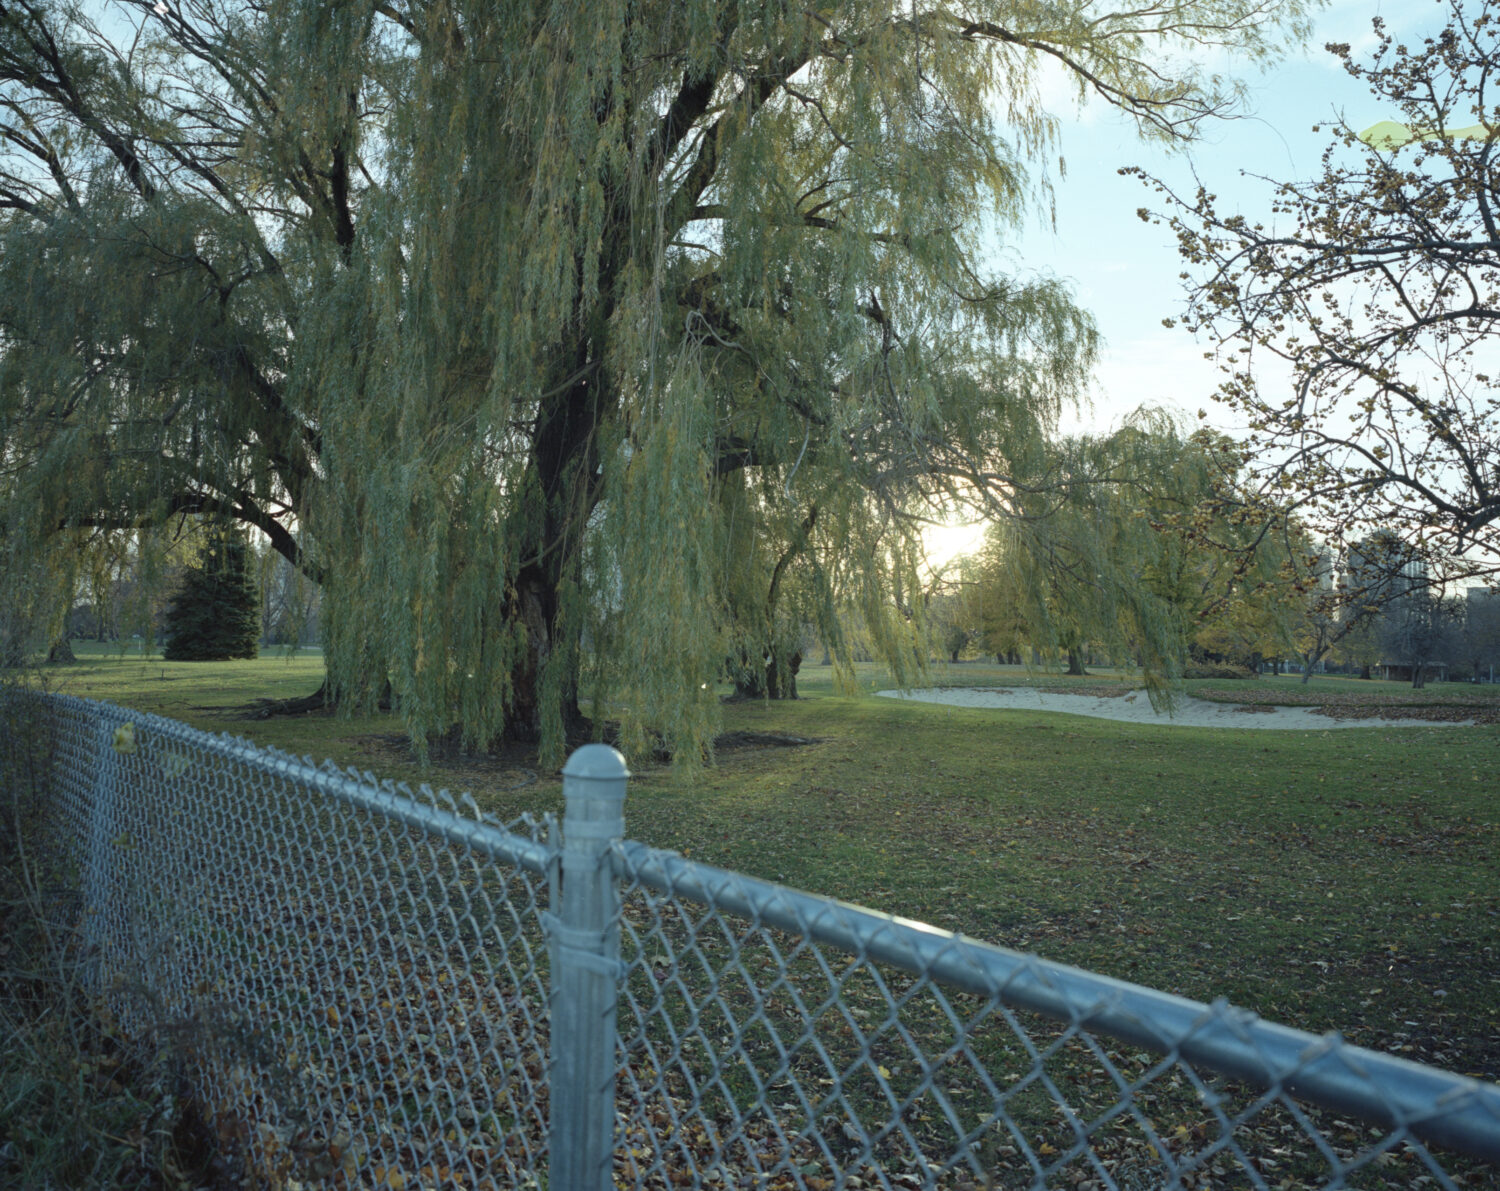 A view from outside the fence of a weeping willow.